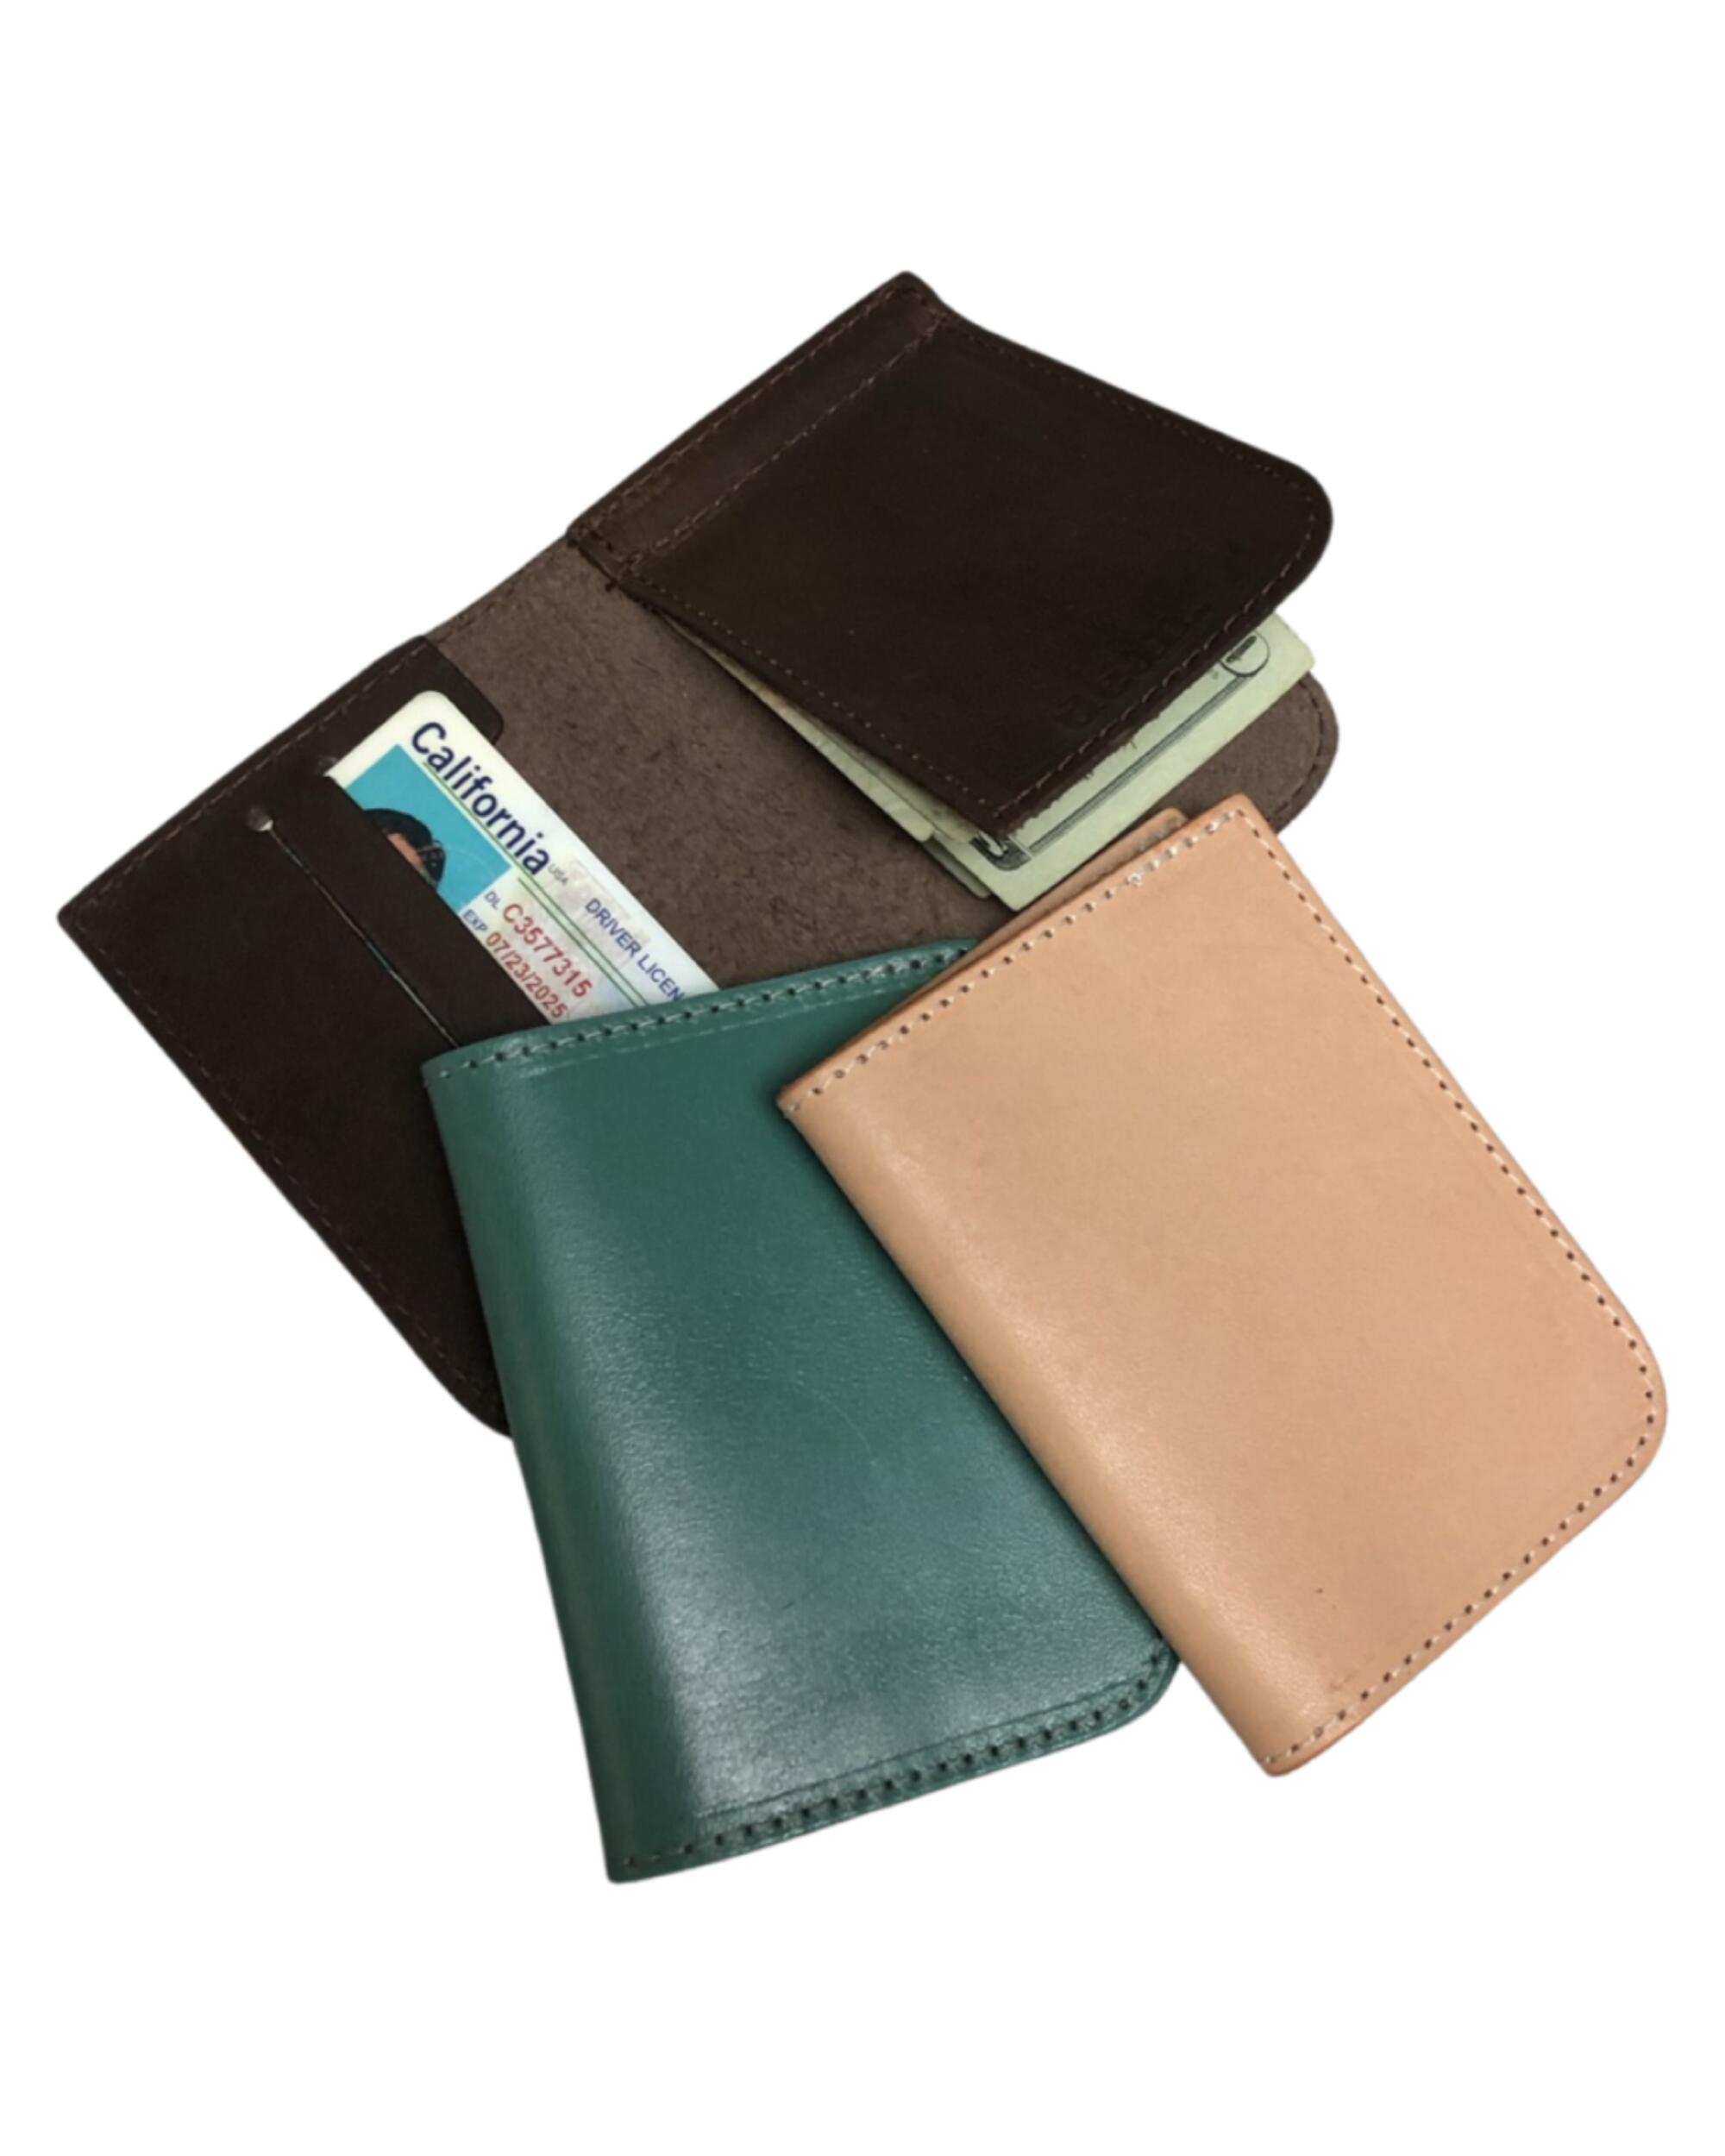 Dean Leather wallets in brown, black, green and beige